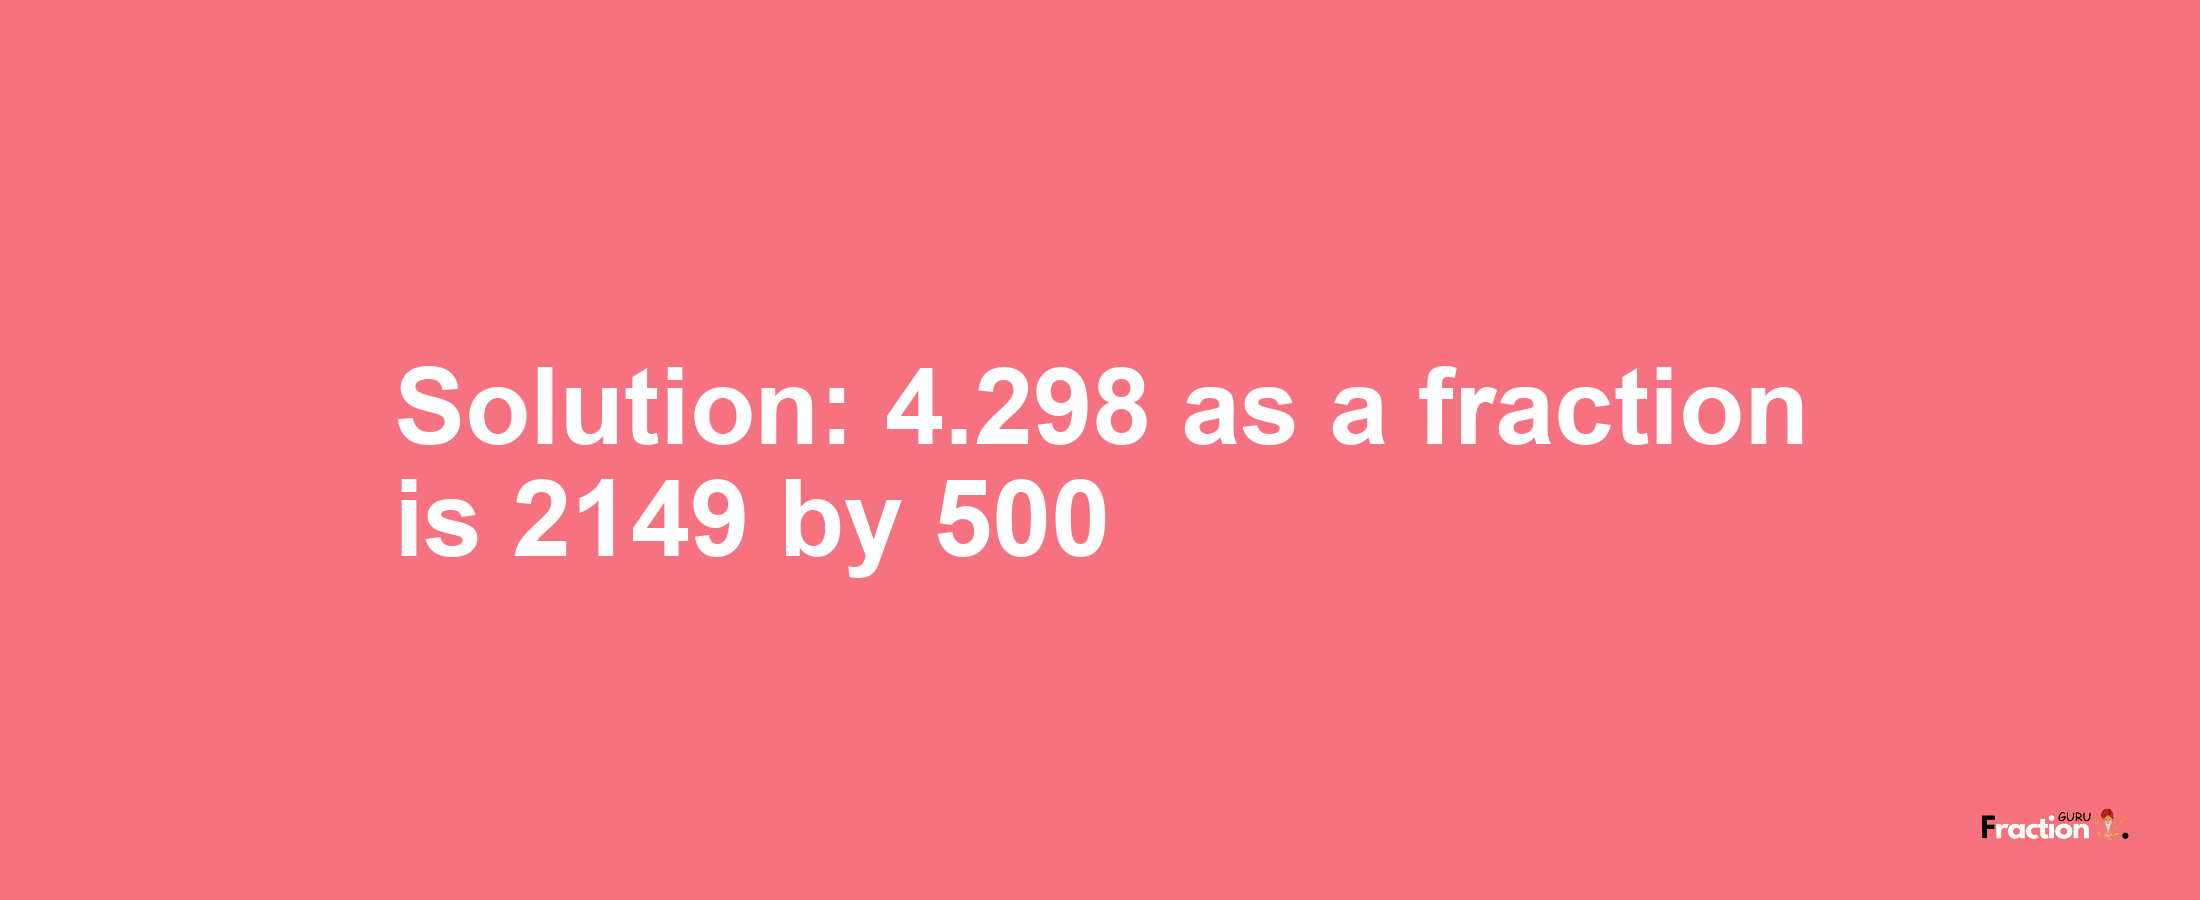 Solution:4.298 as a fraction is 2149/500